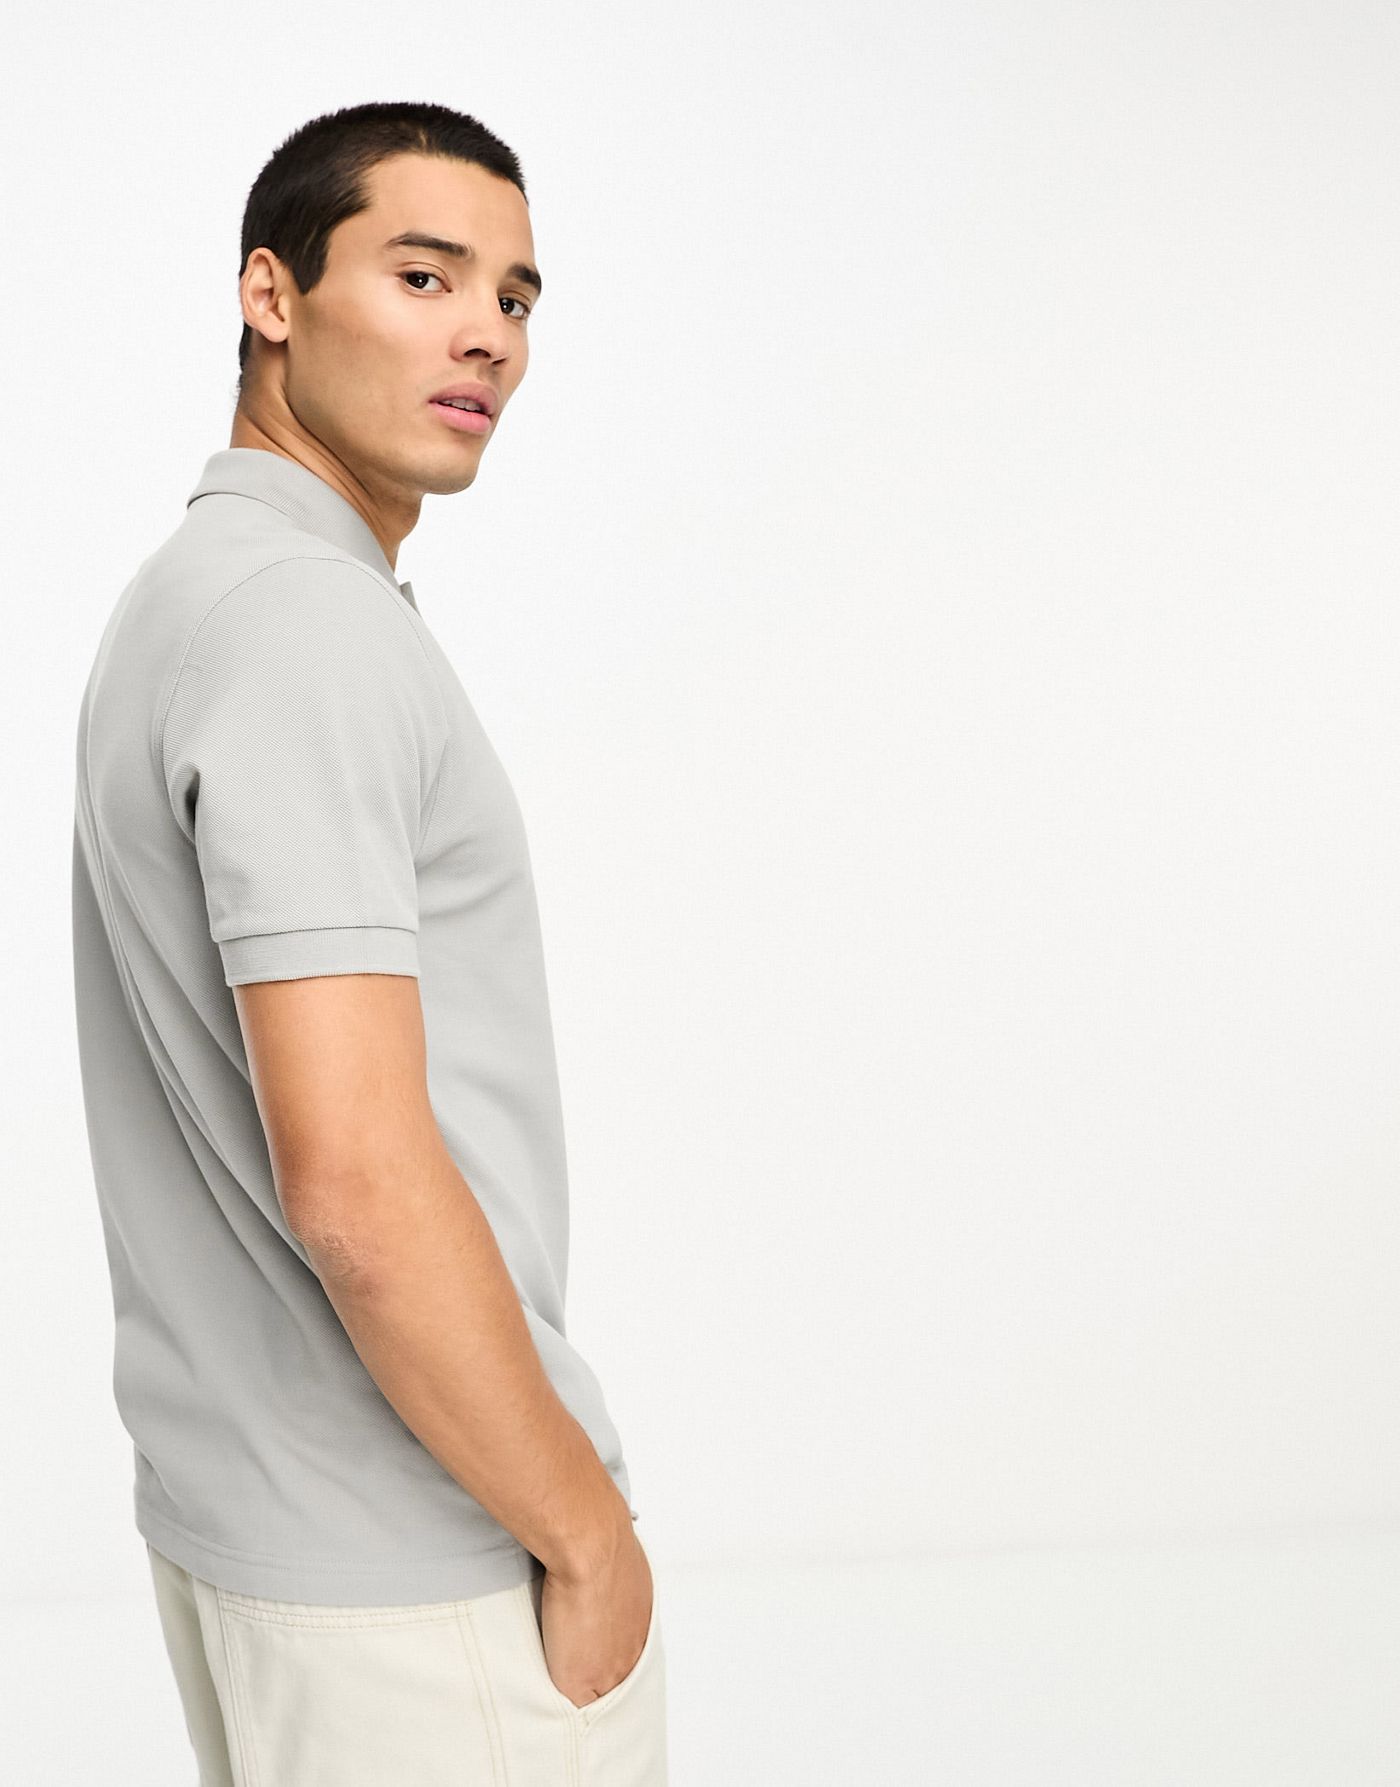 Fred Perry plain polo shirt in limestone grey